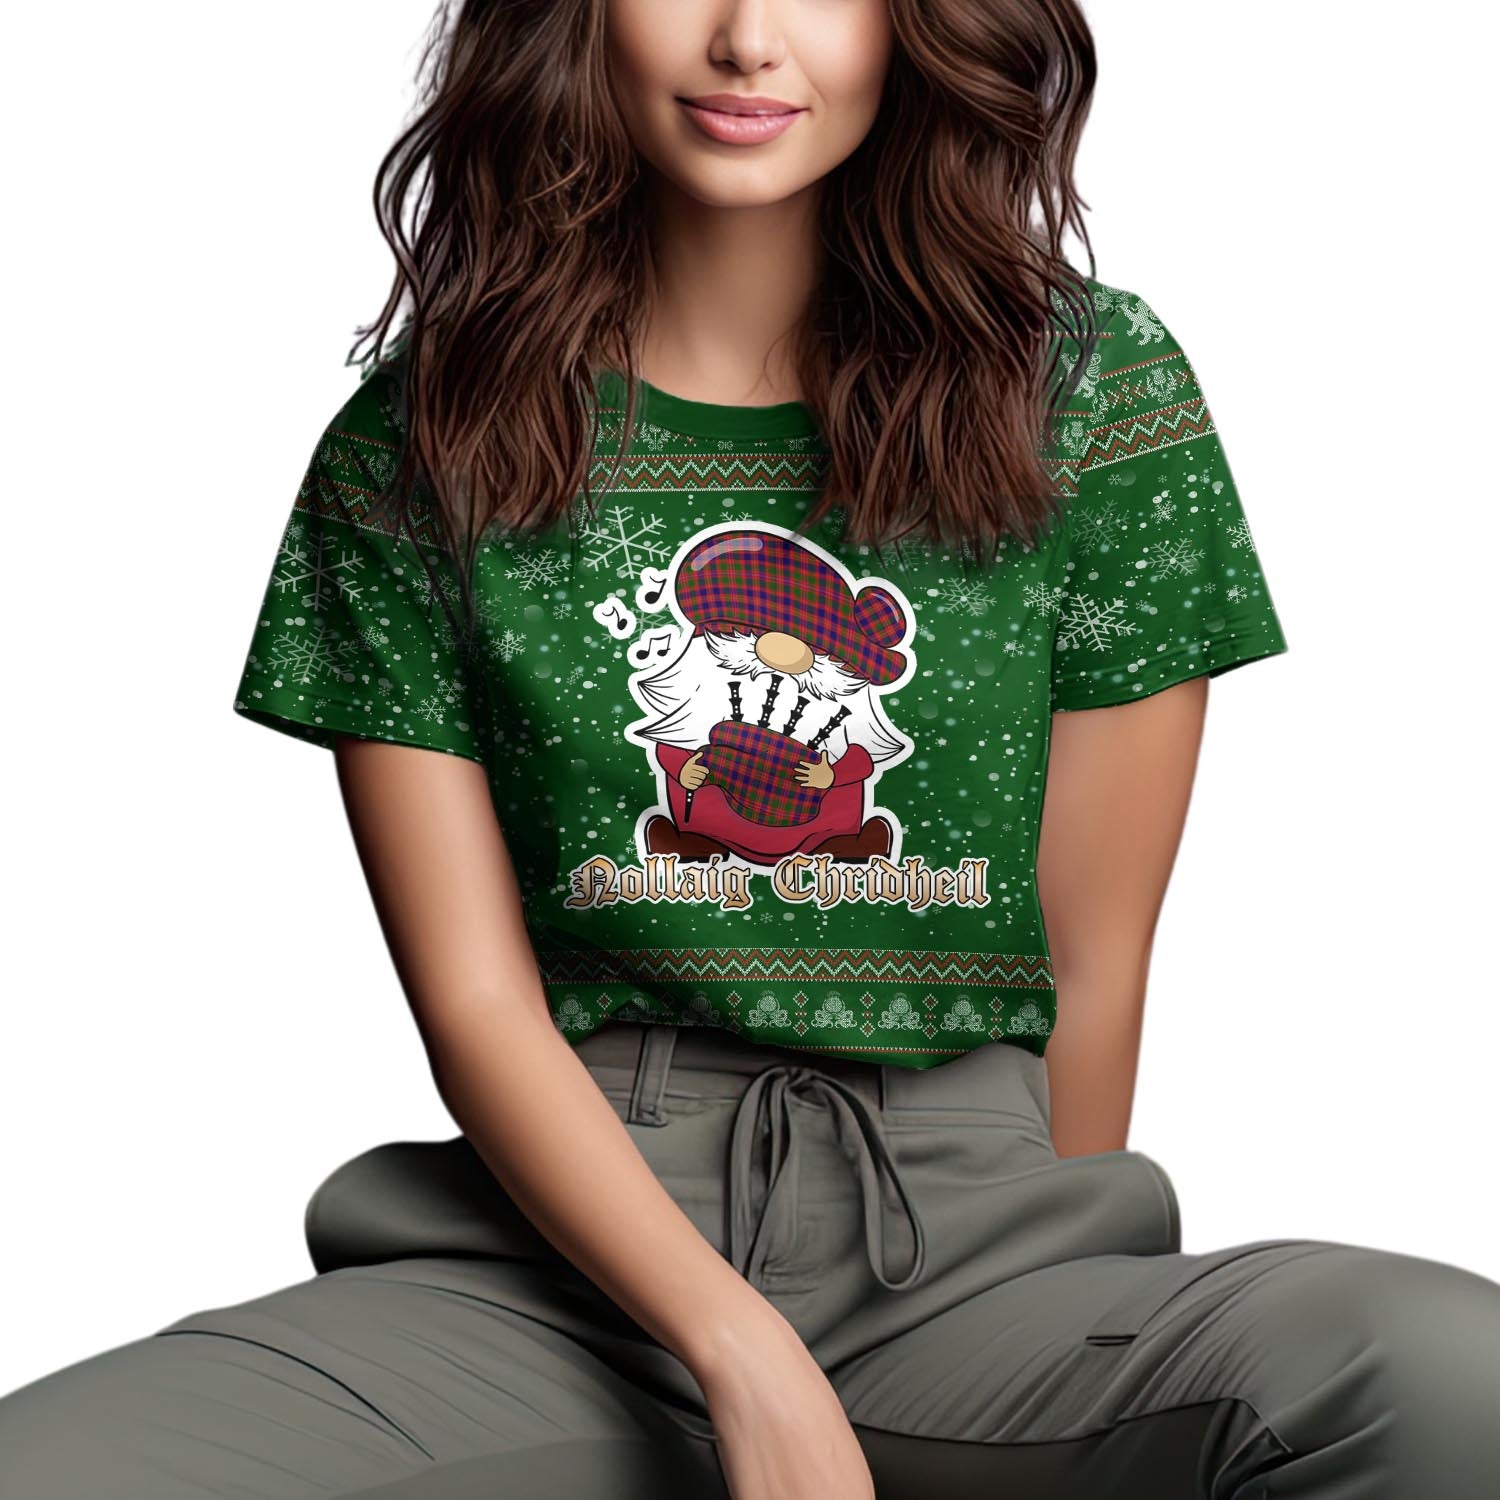 Wright Clan Christmas Family T-Shirt with Funny Gnome Playing Bagpipes Women's Shirt Green - Tartanvibesclothing